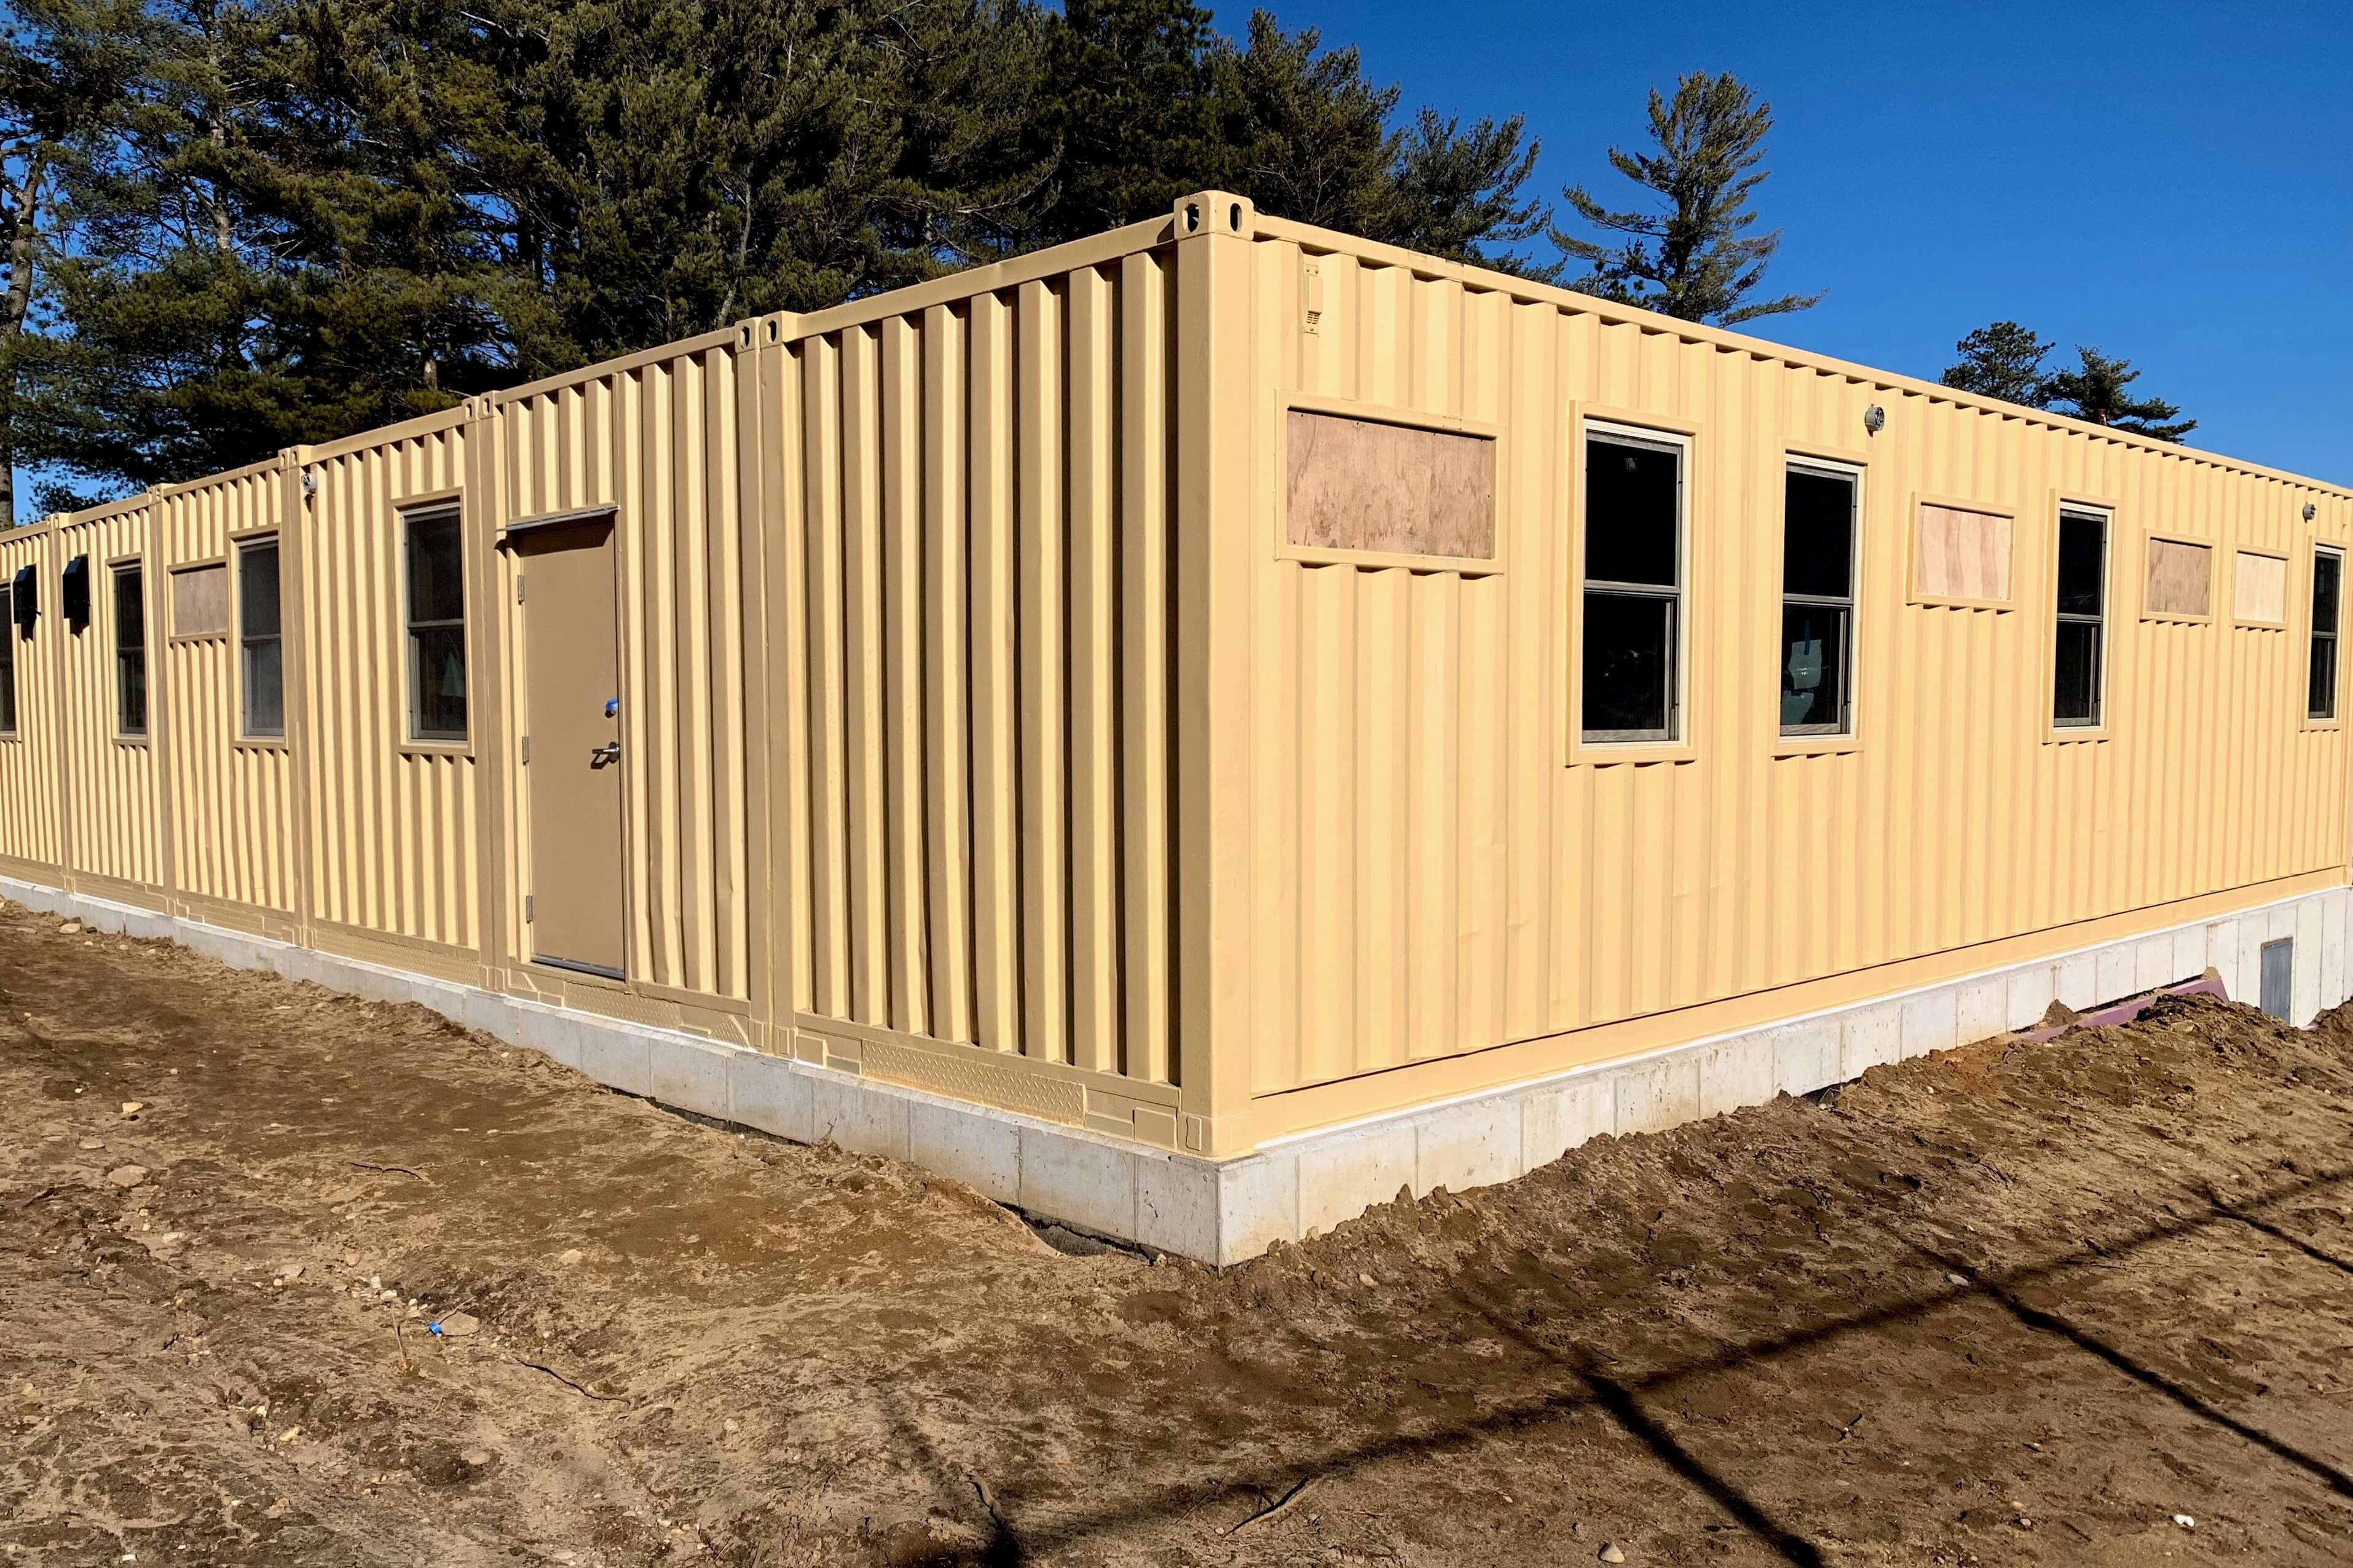 Foundation Options for Shipping Container Structures